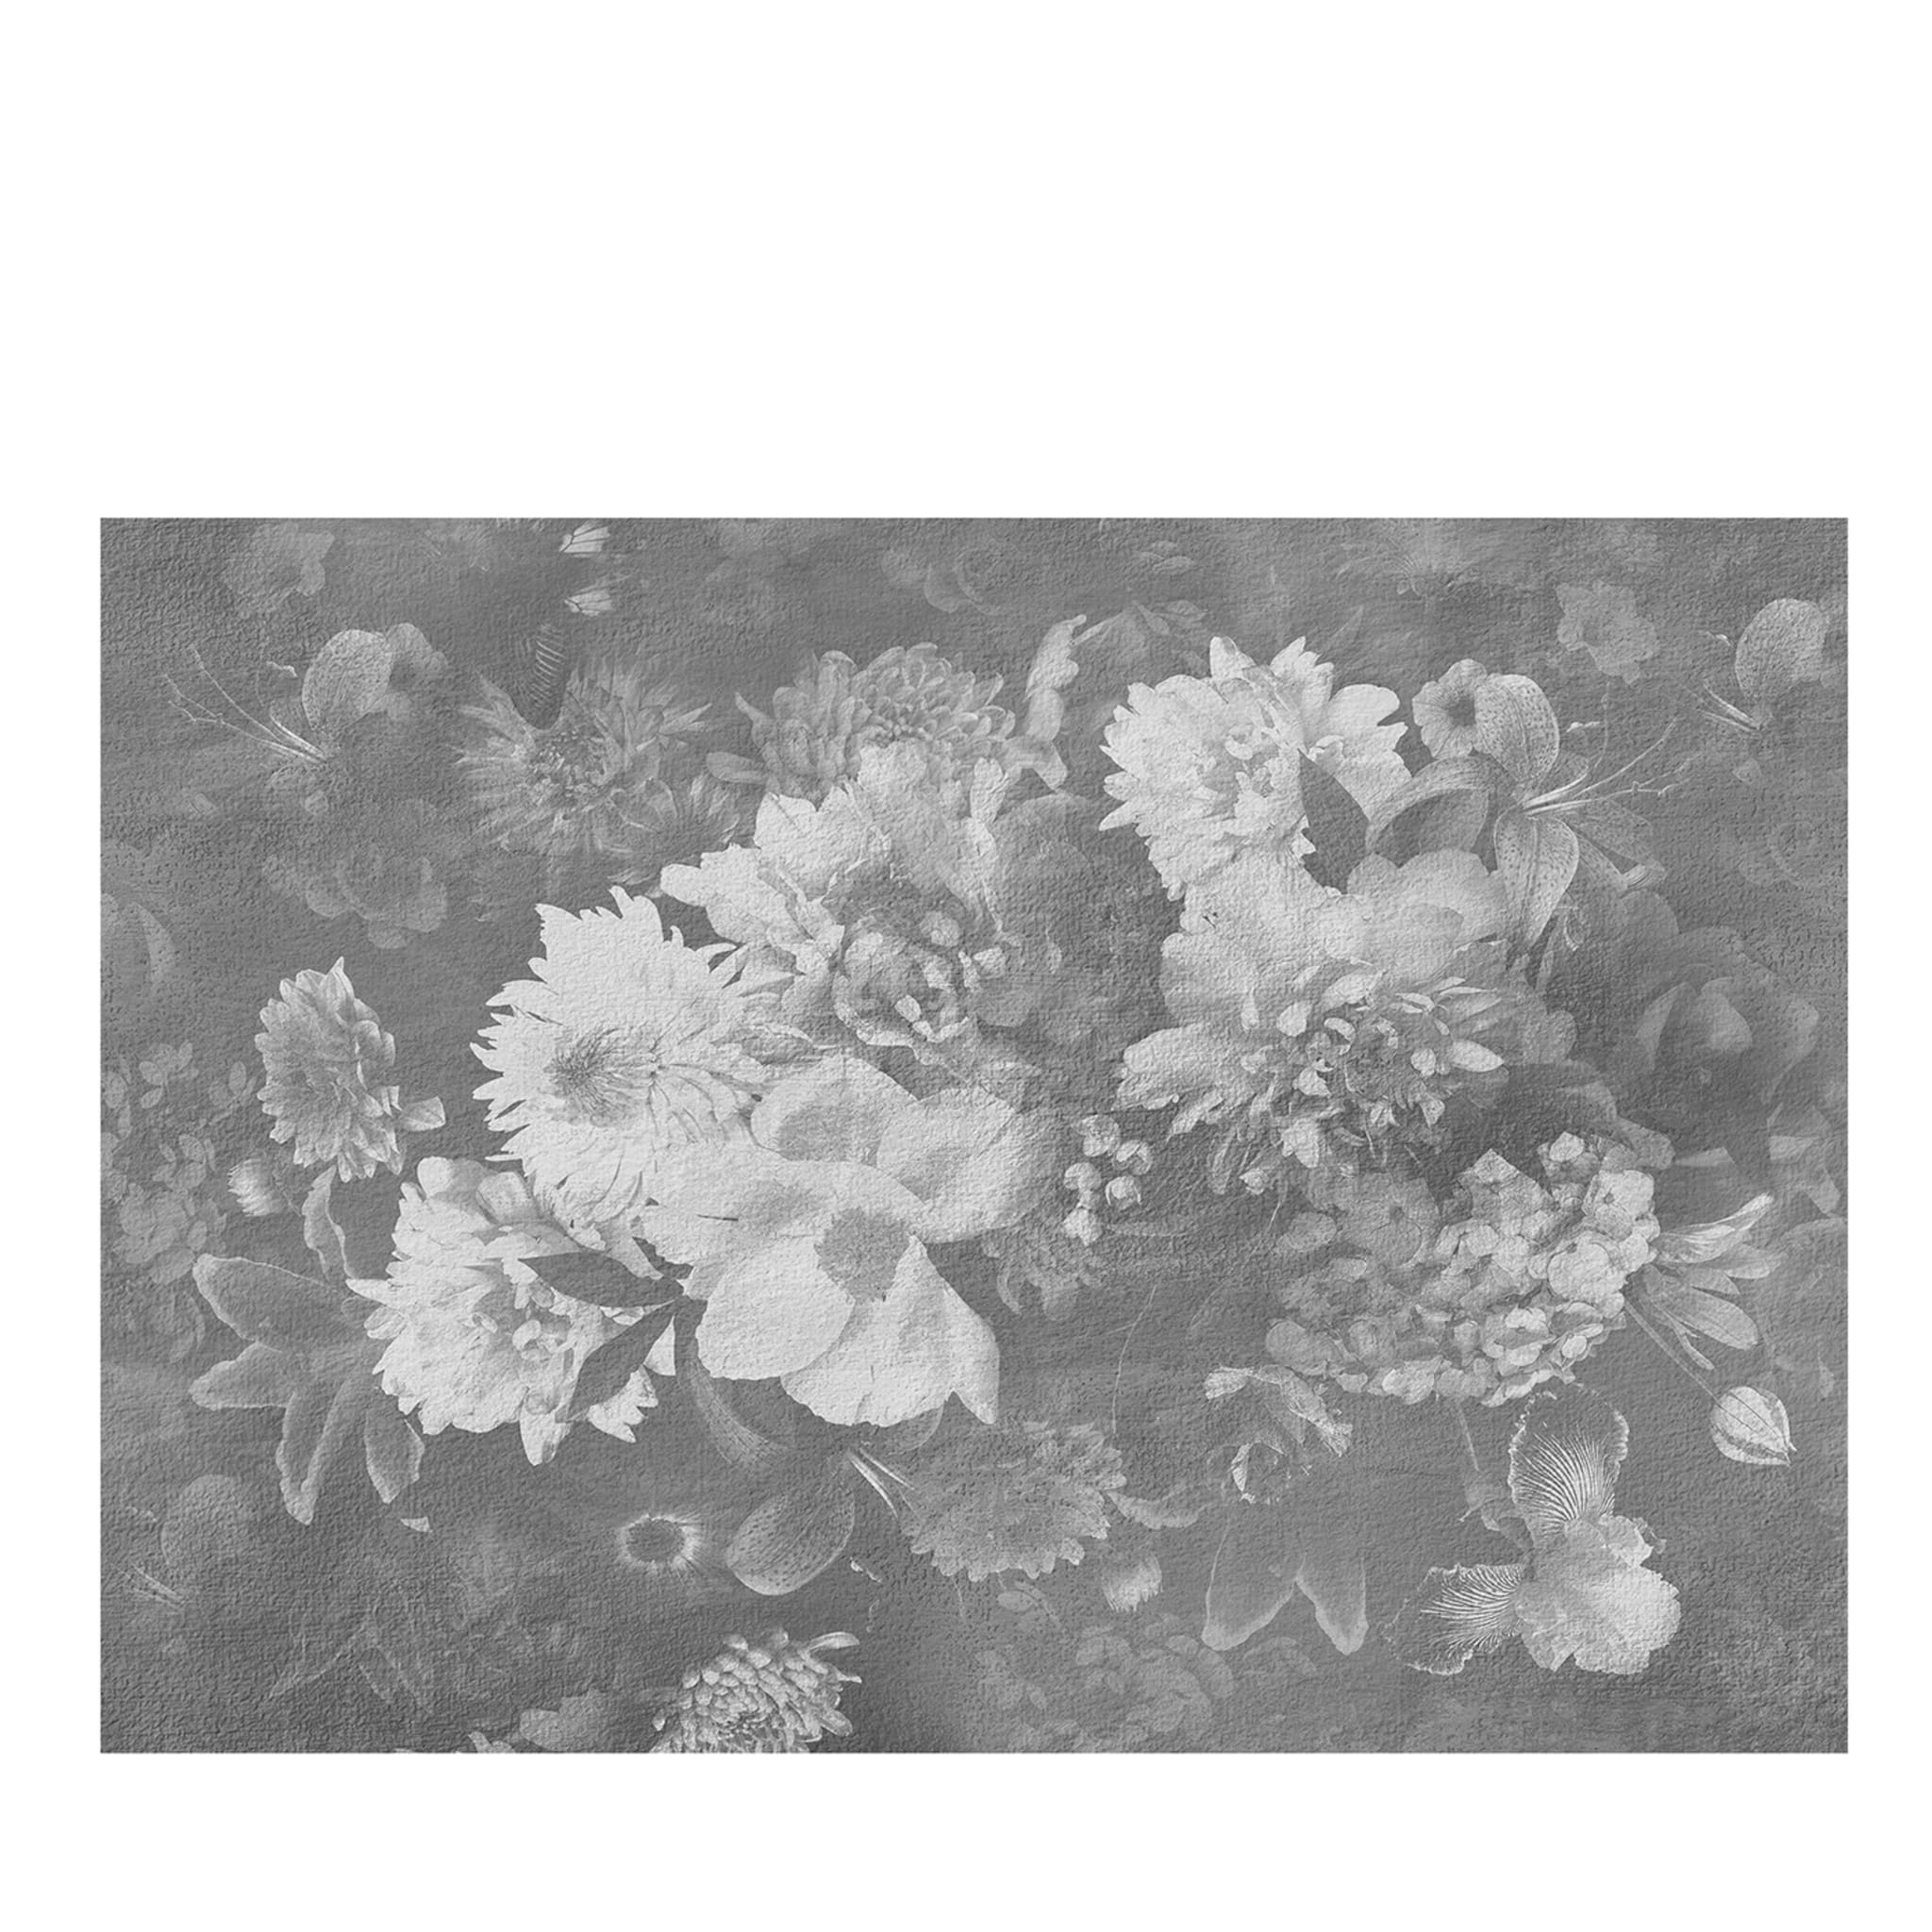 B&W blooming flowers textured wallpaper - Main view